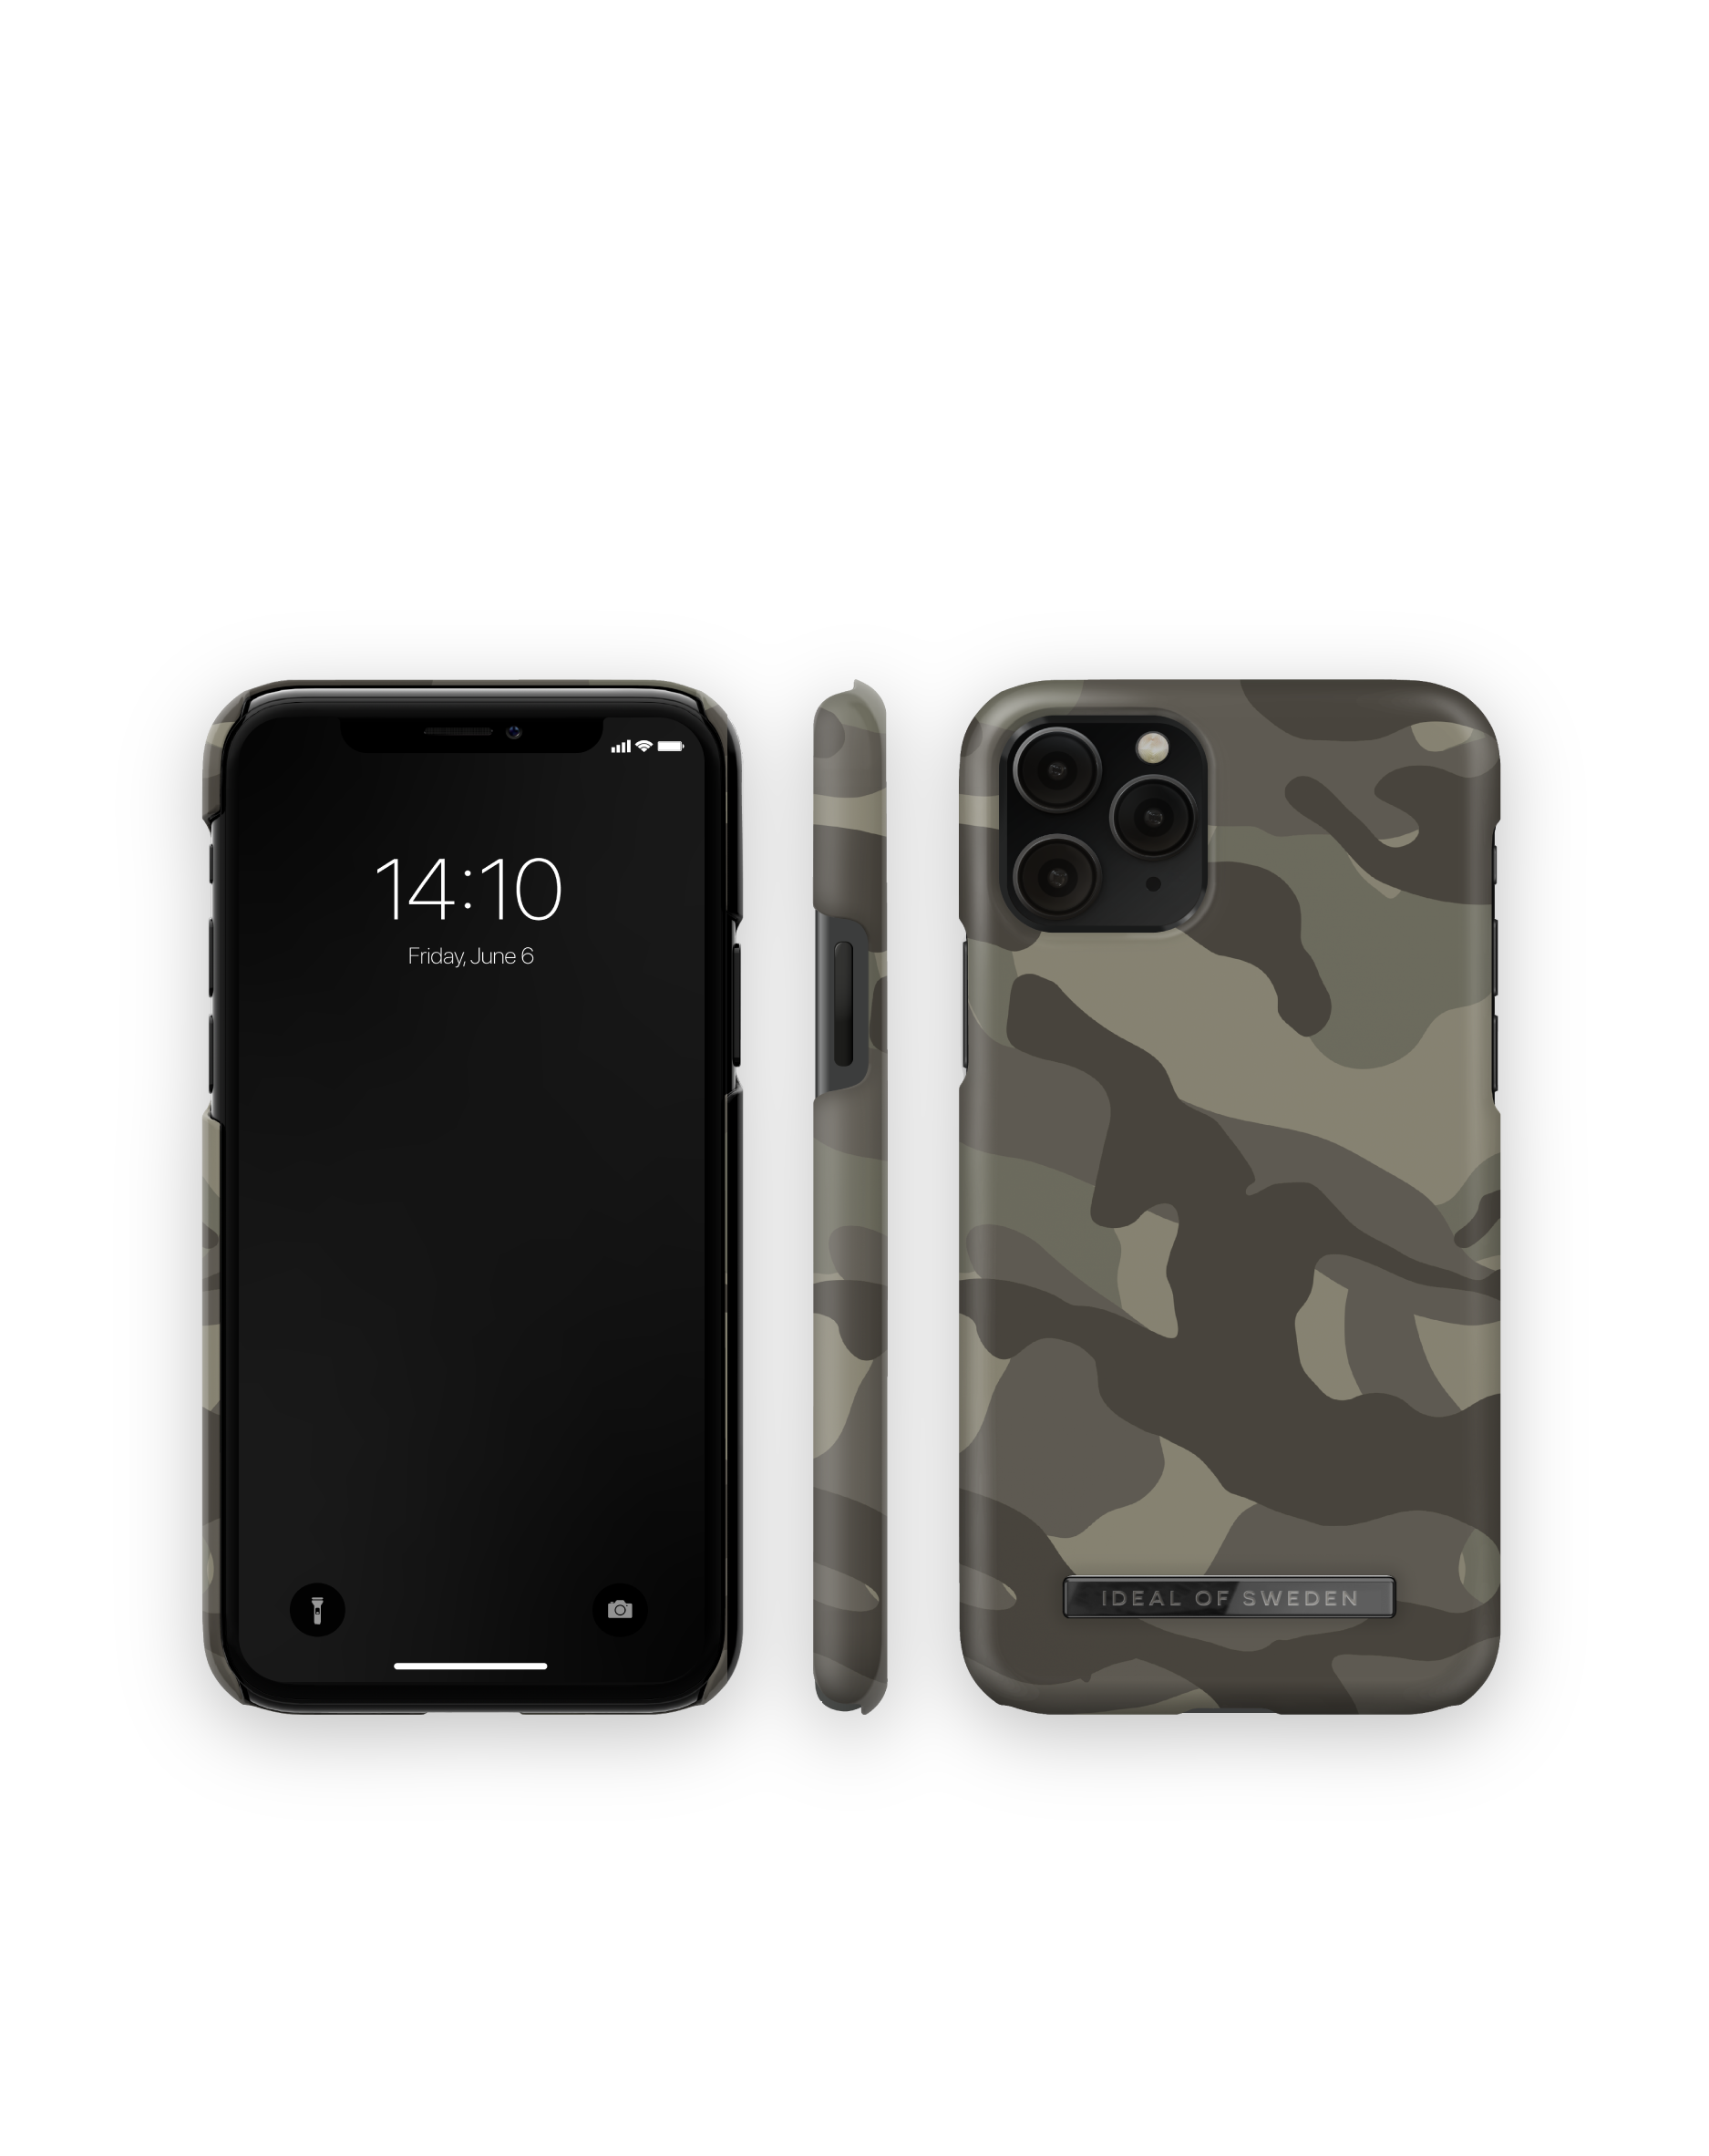 iPhone SWEDEN 11 IDEAL Matte Camo IDFCAW21-I1958-359, Pro/XS/X, Apple, OF Backcover,